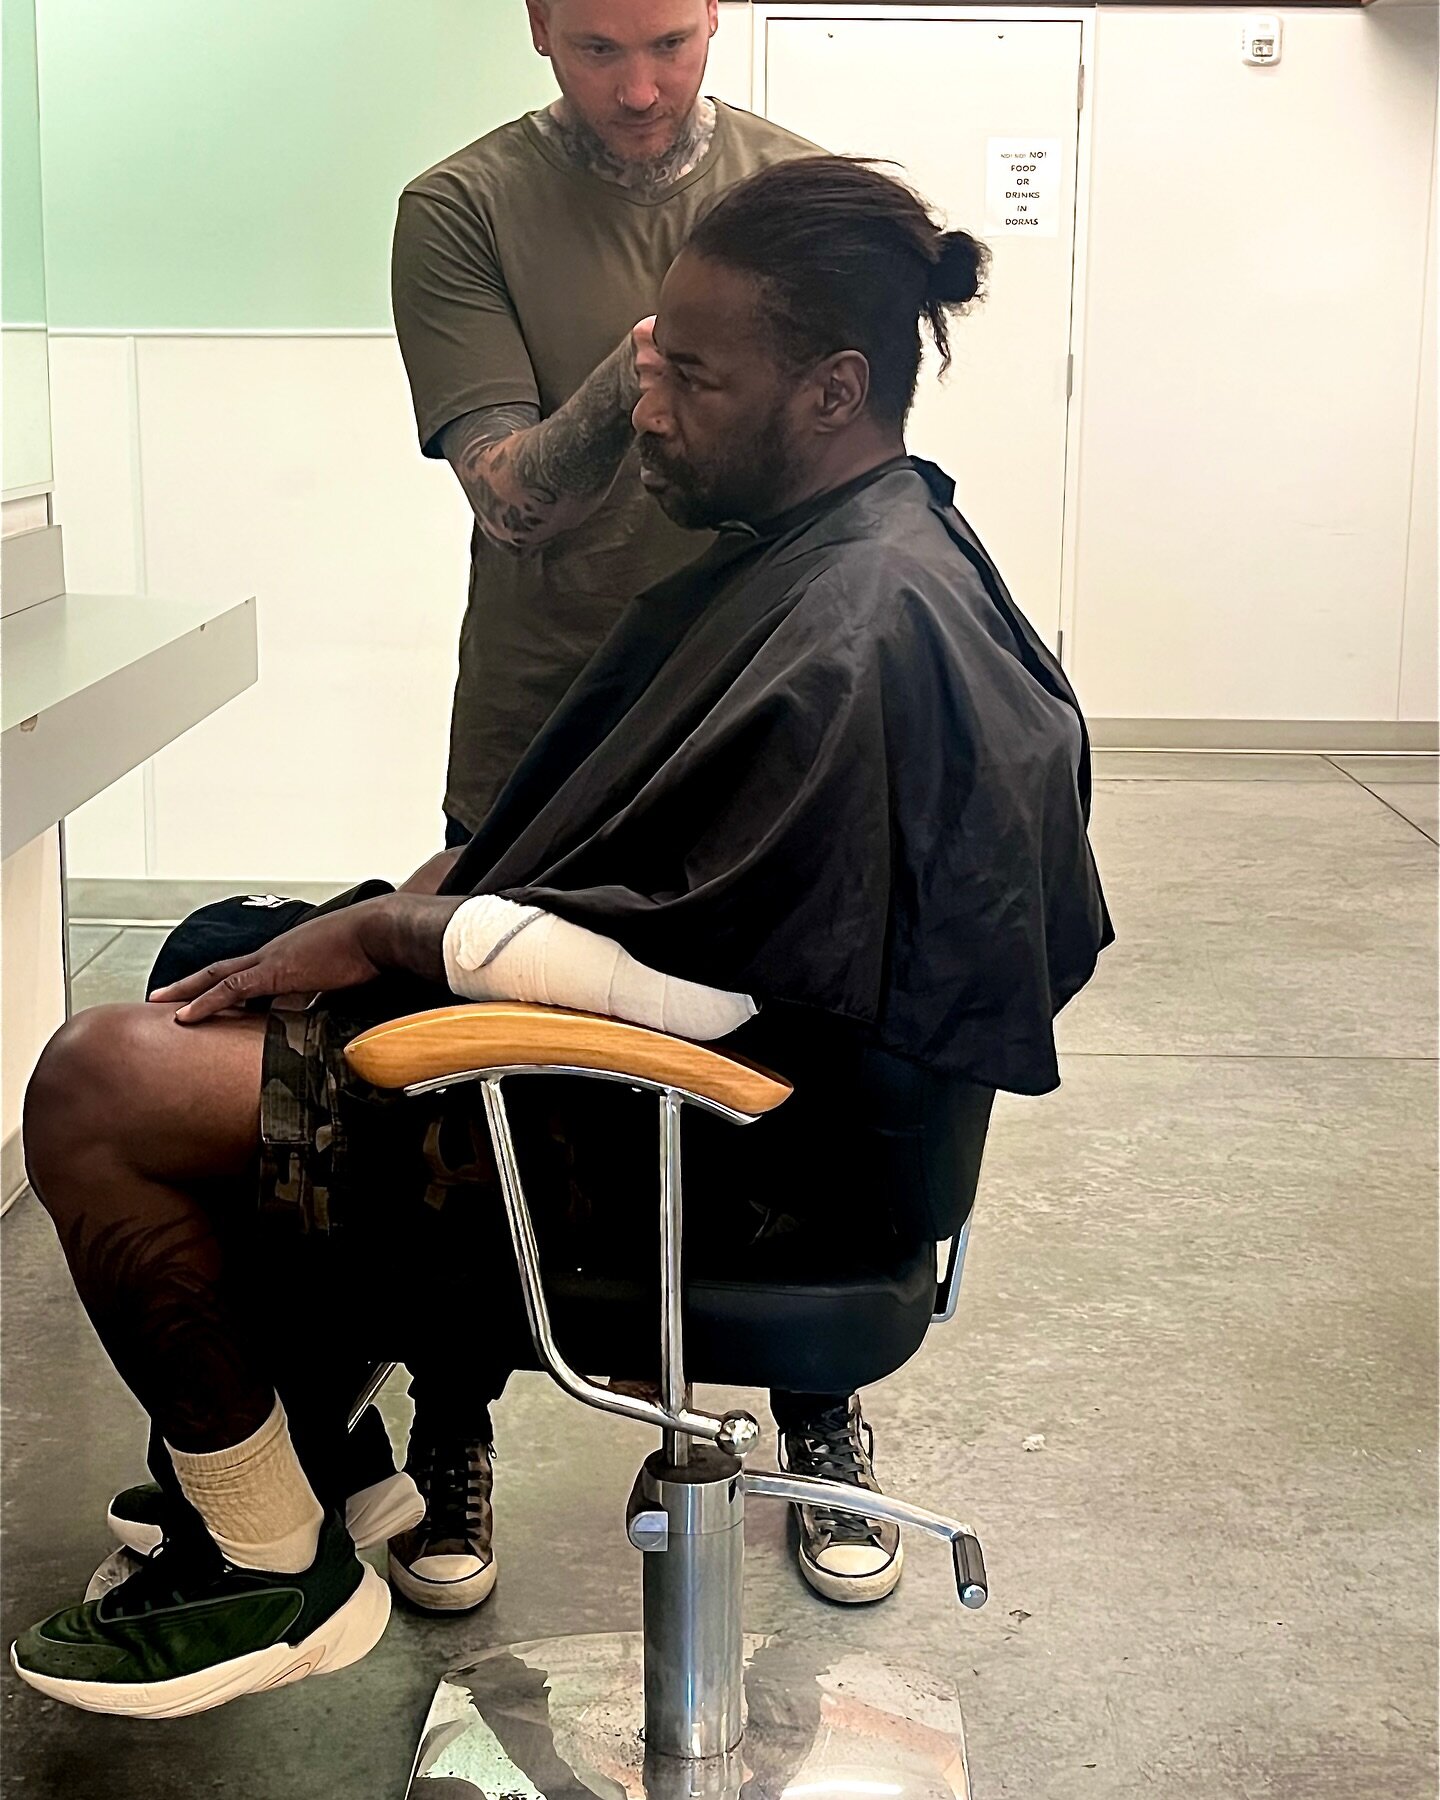 Mykal, the founder of Hairstylists for Humanity, volunteering his time to give haircuts for the homeless community at Transition Projects @transitionprojects - a nonprofit organization with over 53 years of experience providing life-saving and life-c